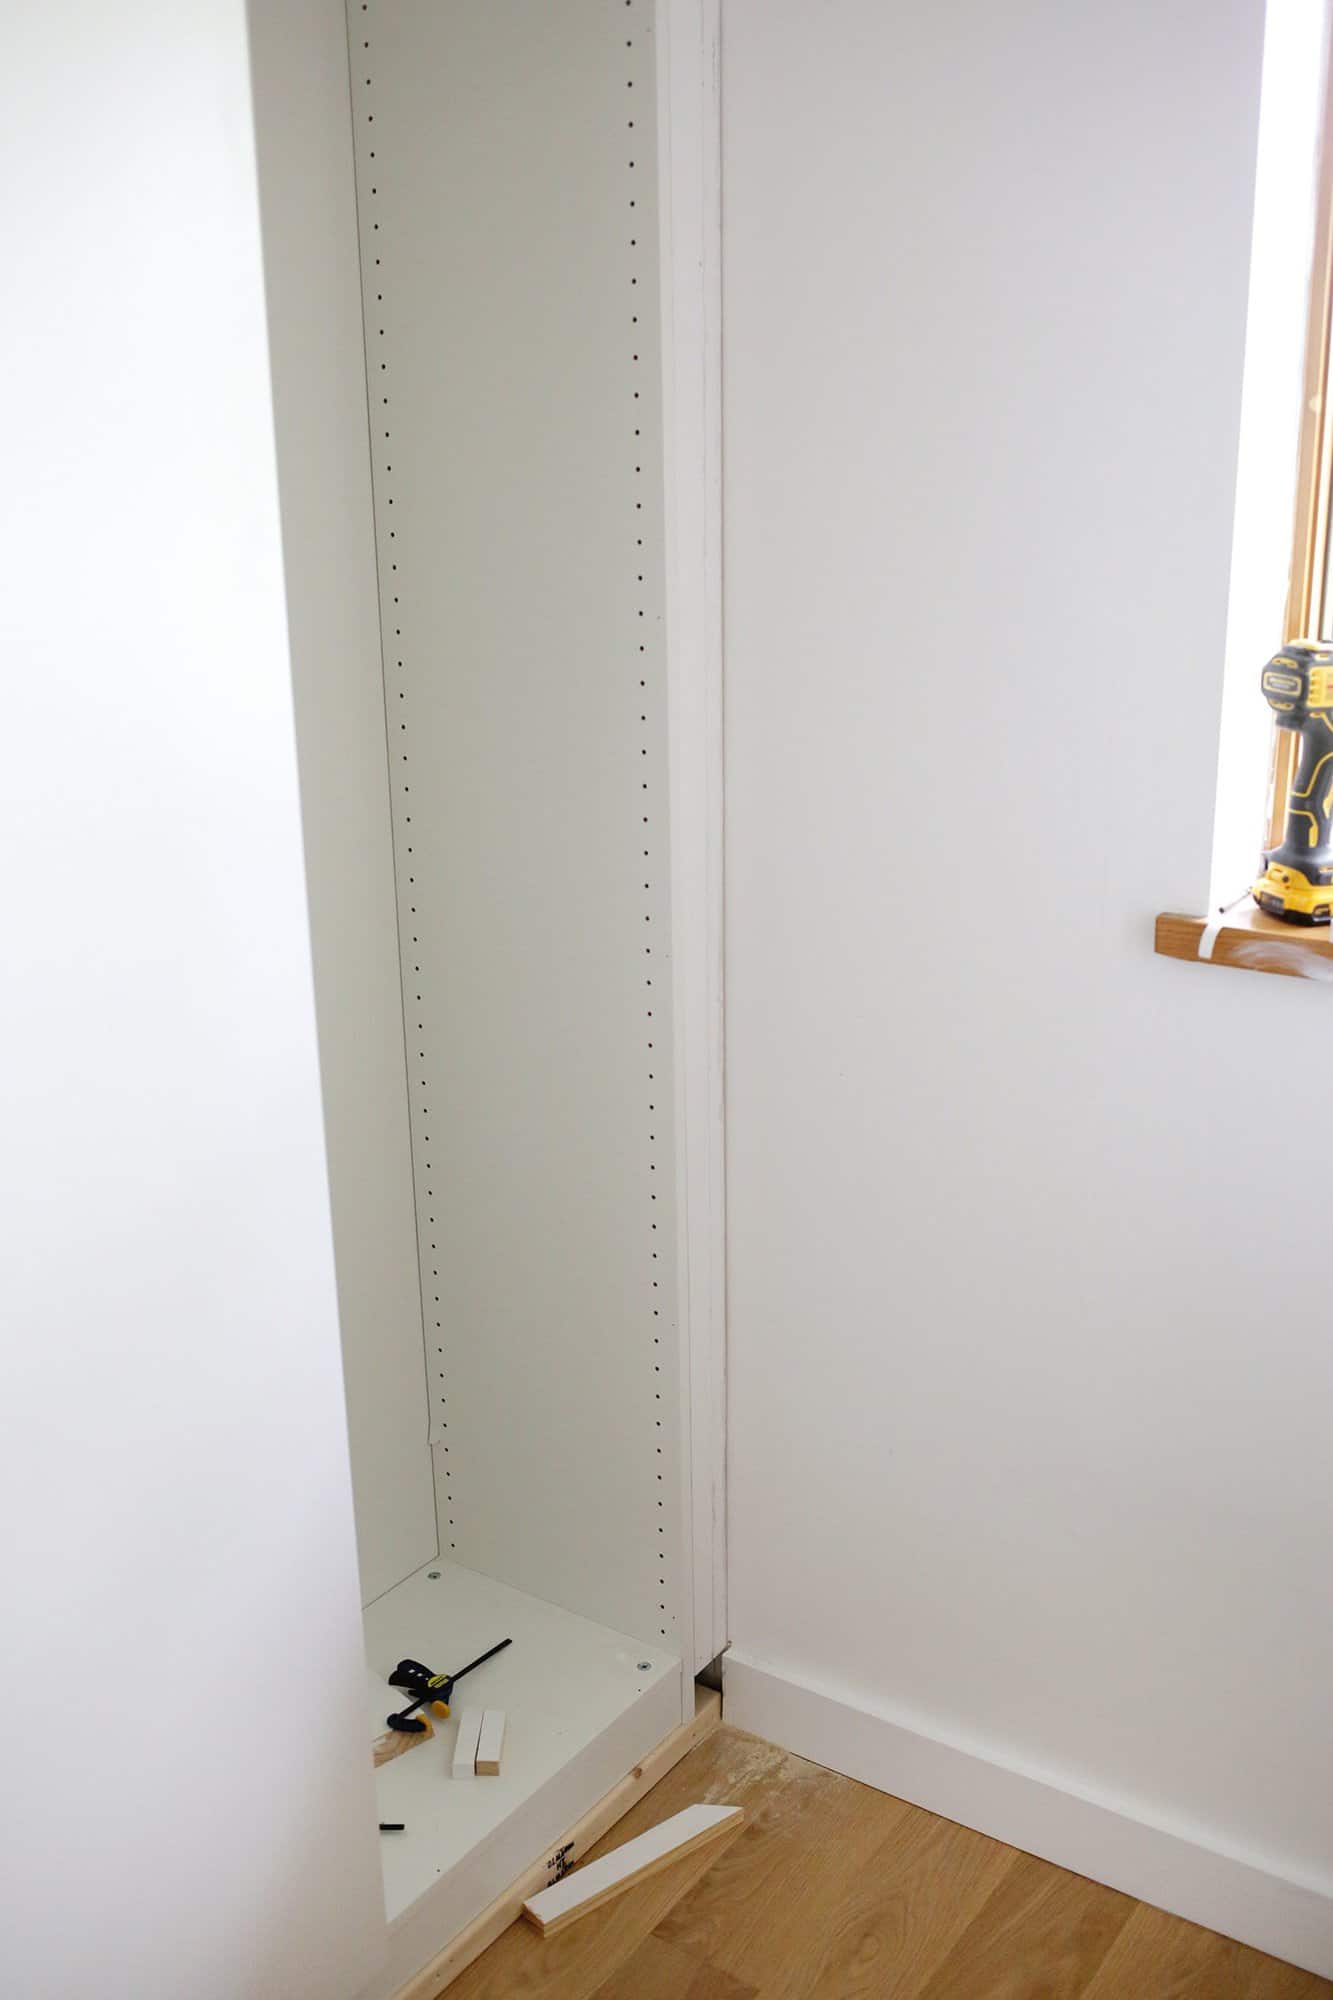 board filling in gap between closet and wall